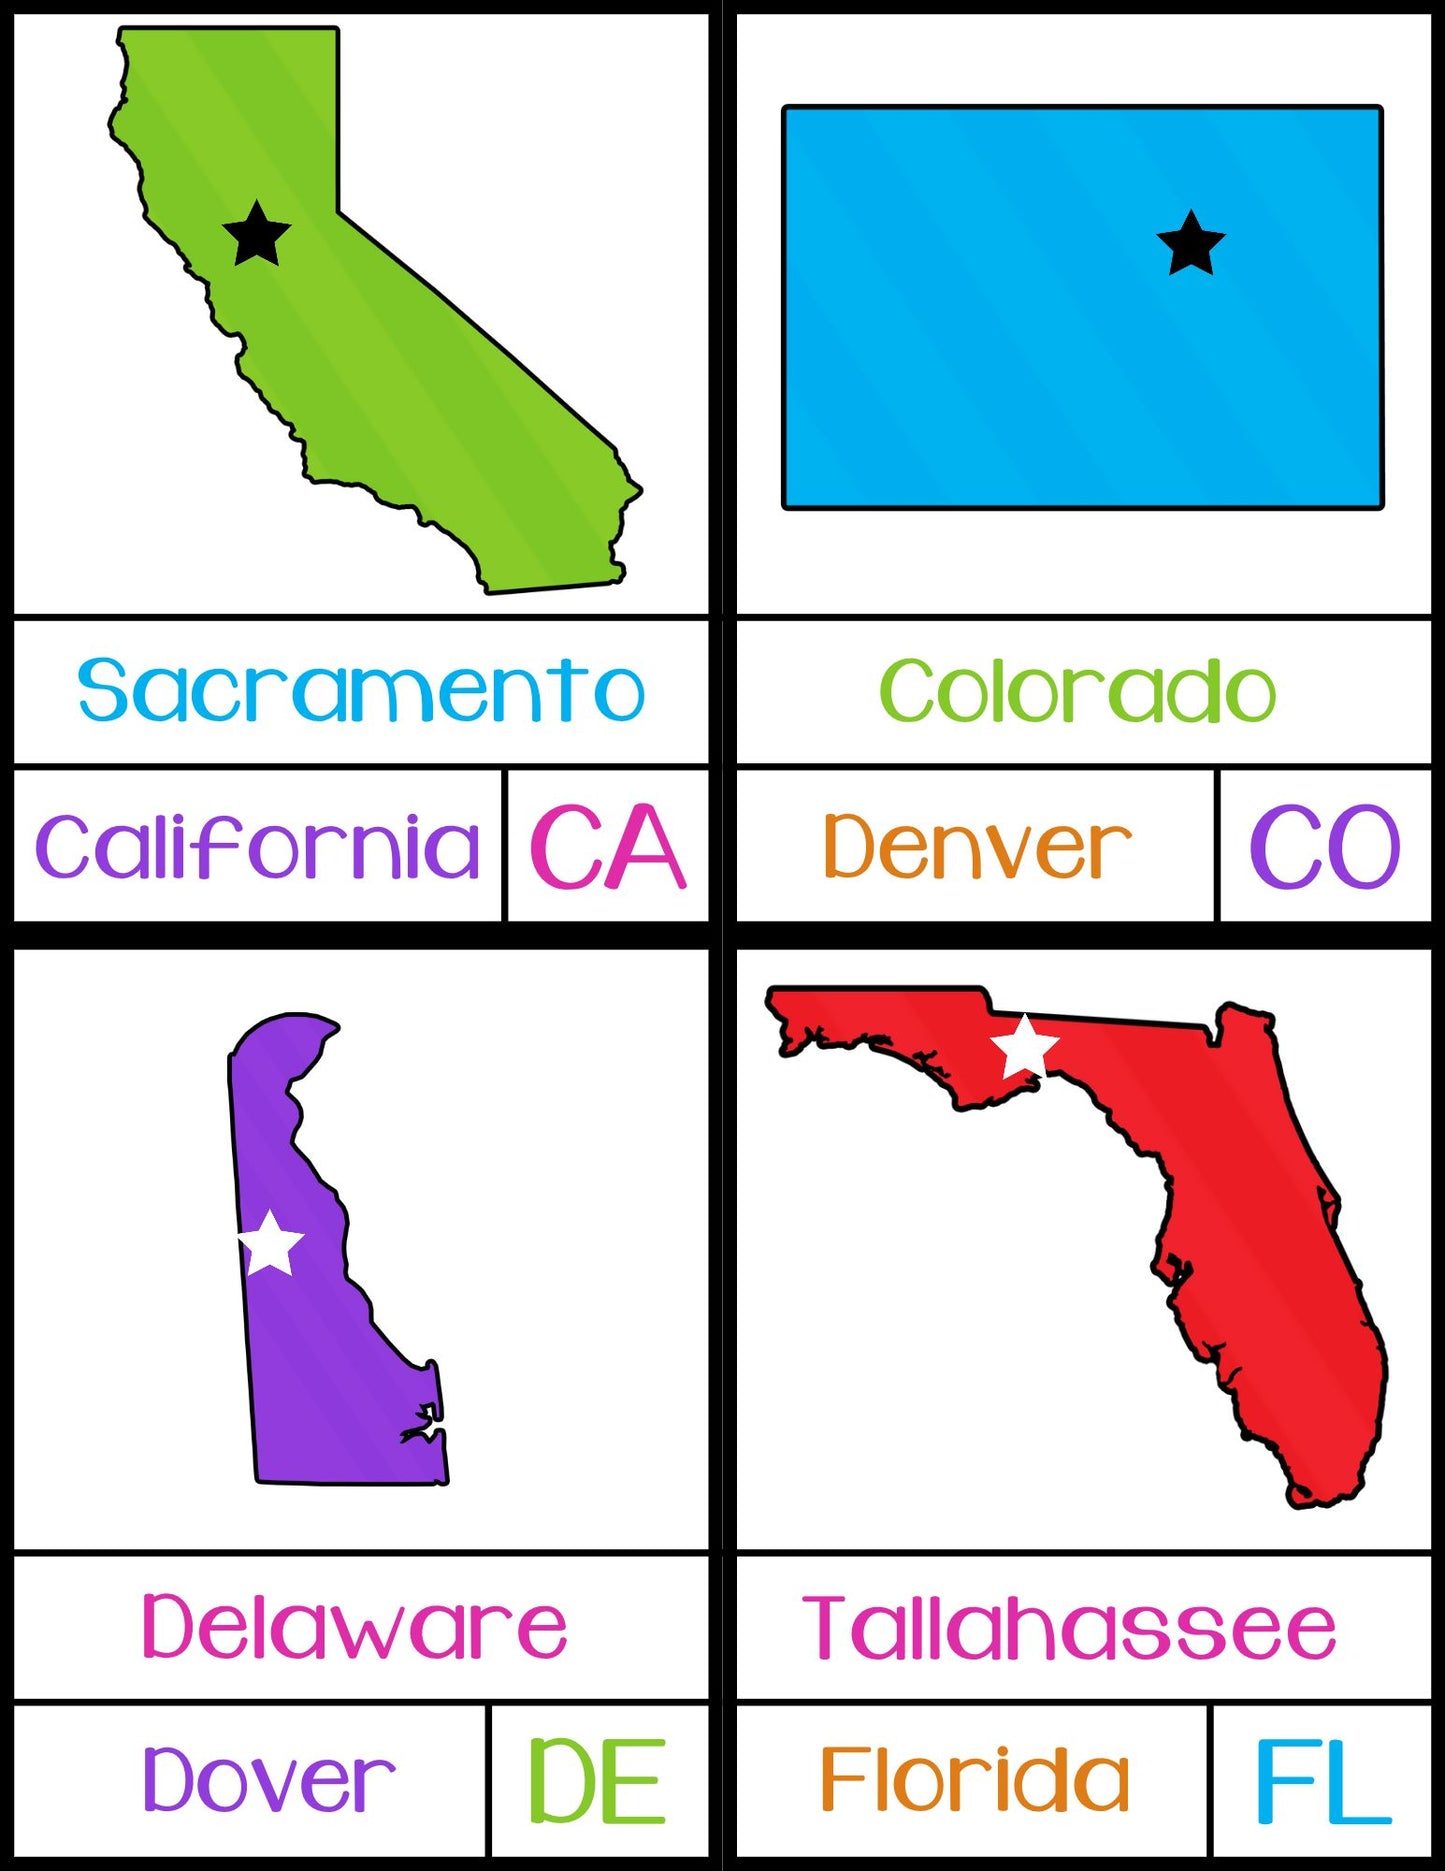 USA States & Capitals 4-Part Puzzles - PHYSICAL & DIGITAL VERSION